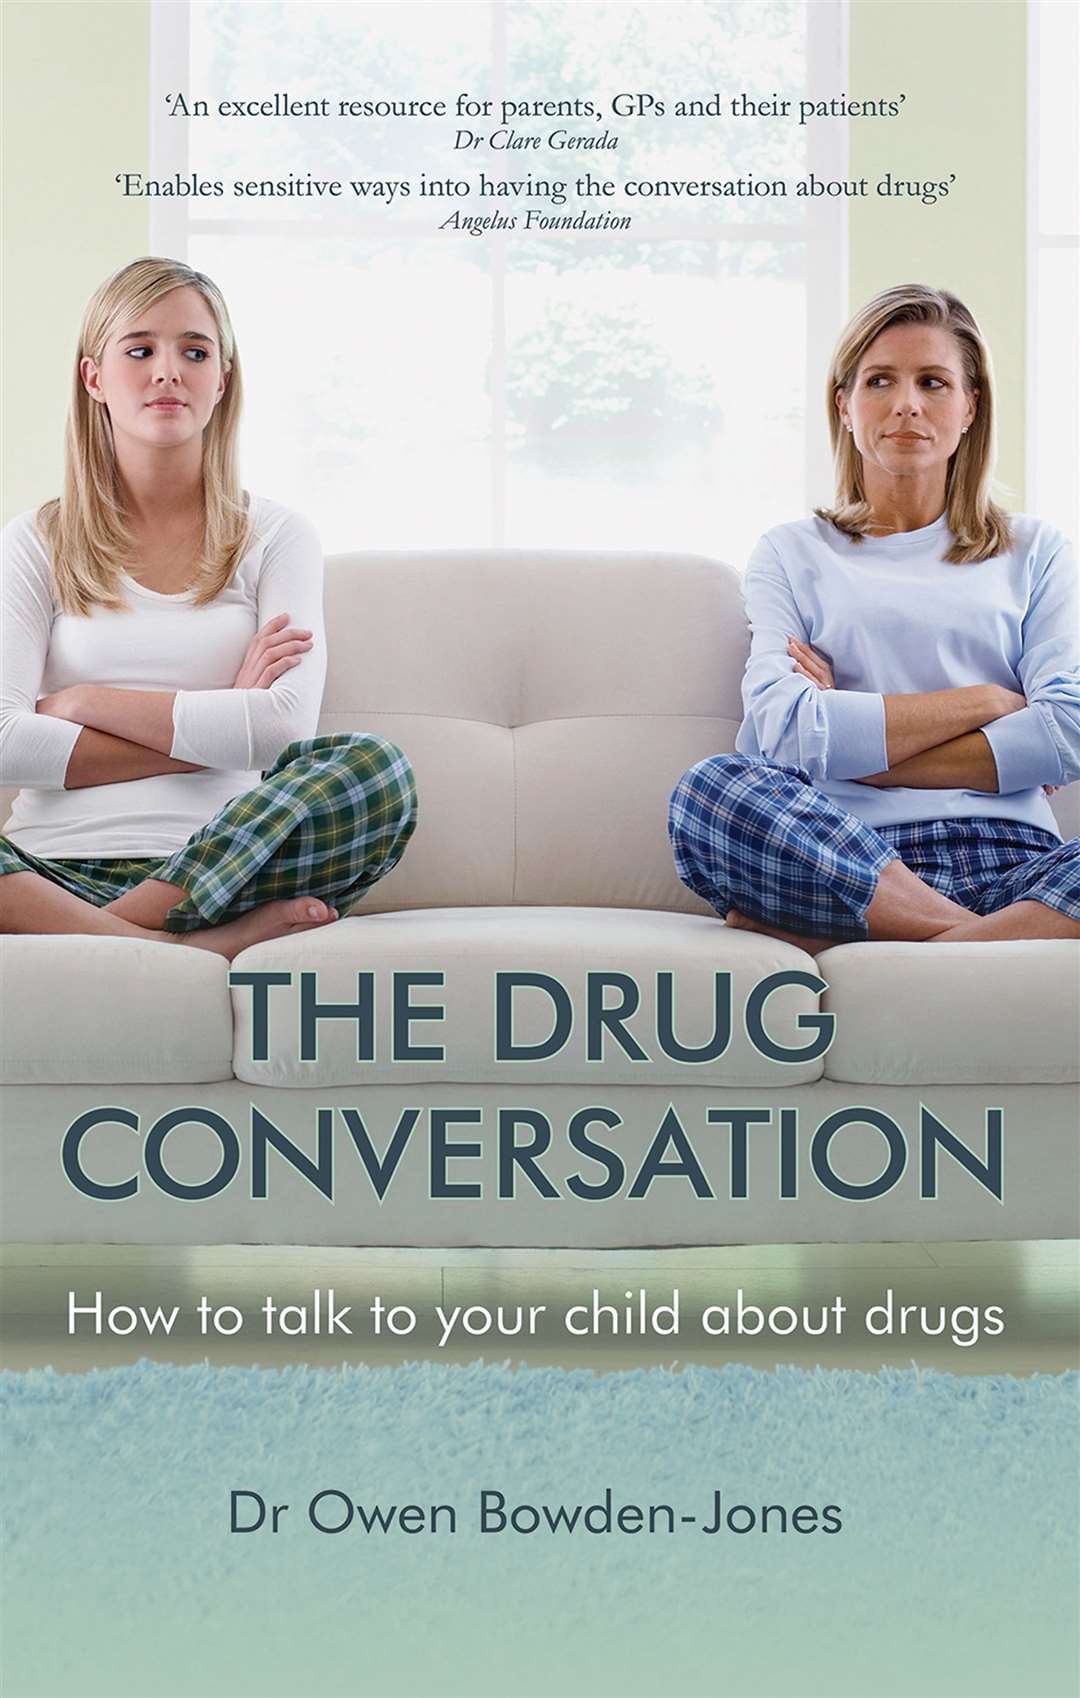 The Drug Conversation by Dr Owen Bowden-Jones is published by the Royal College of Psychiatrists, priced £12.99